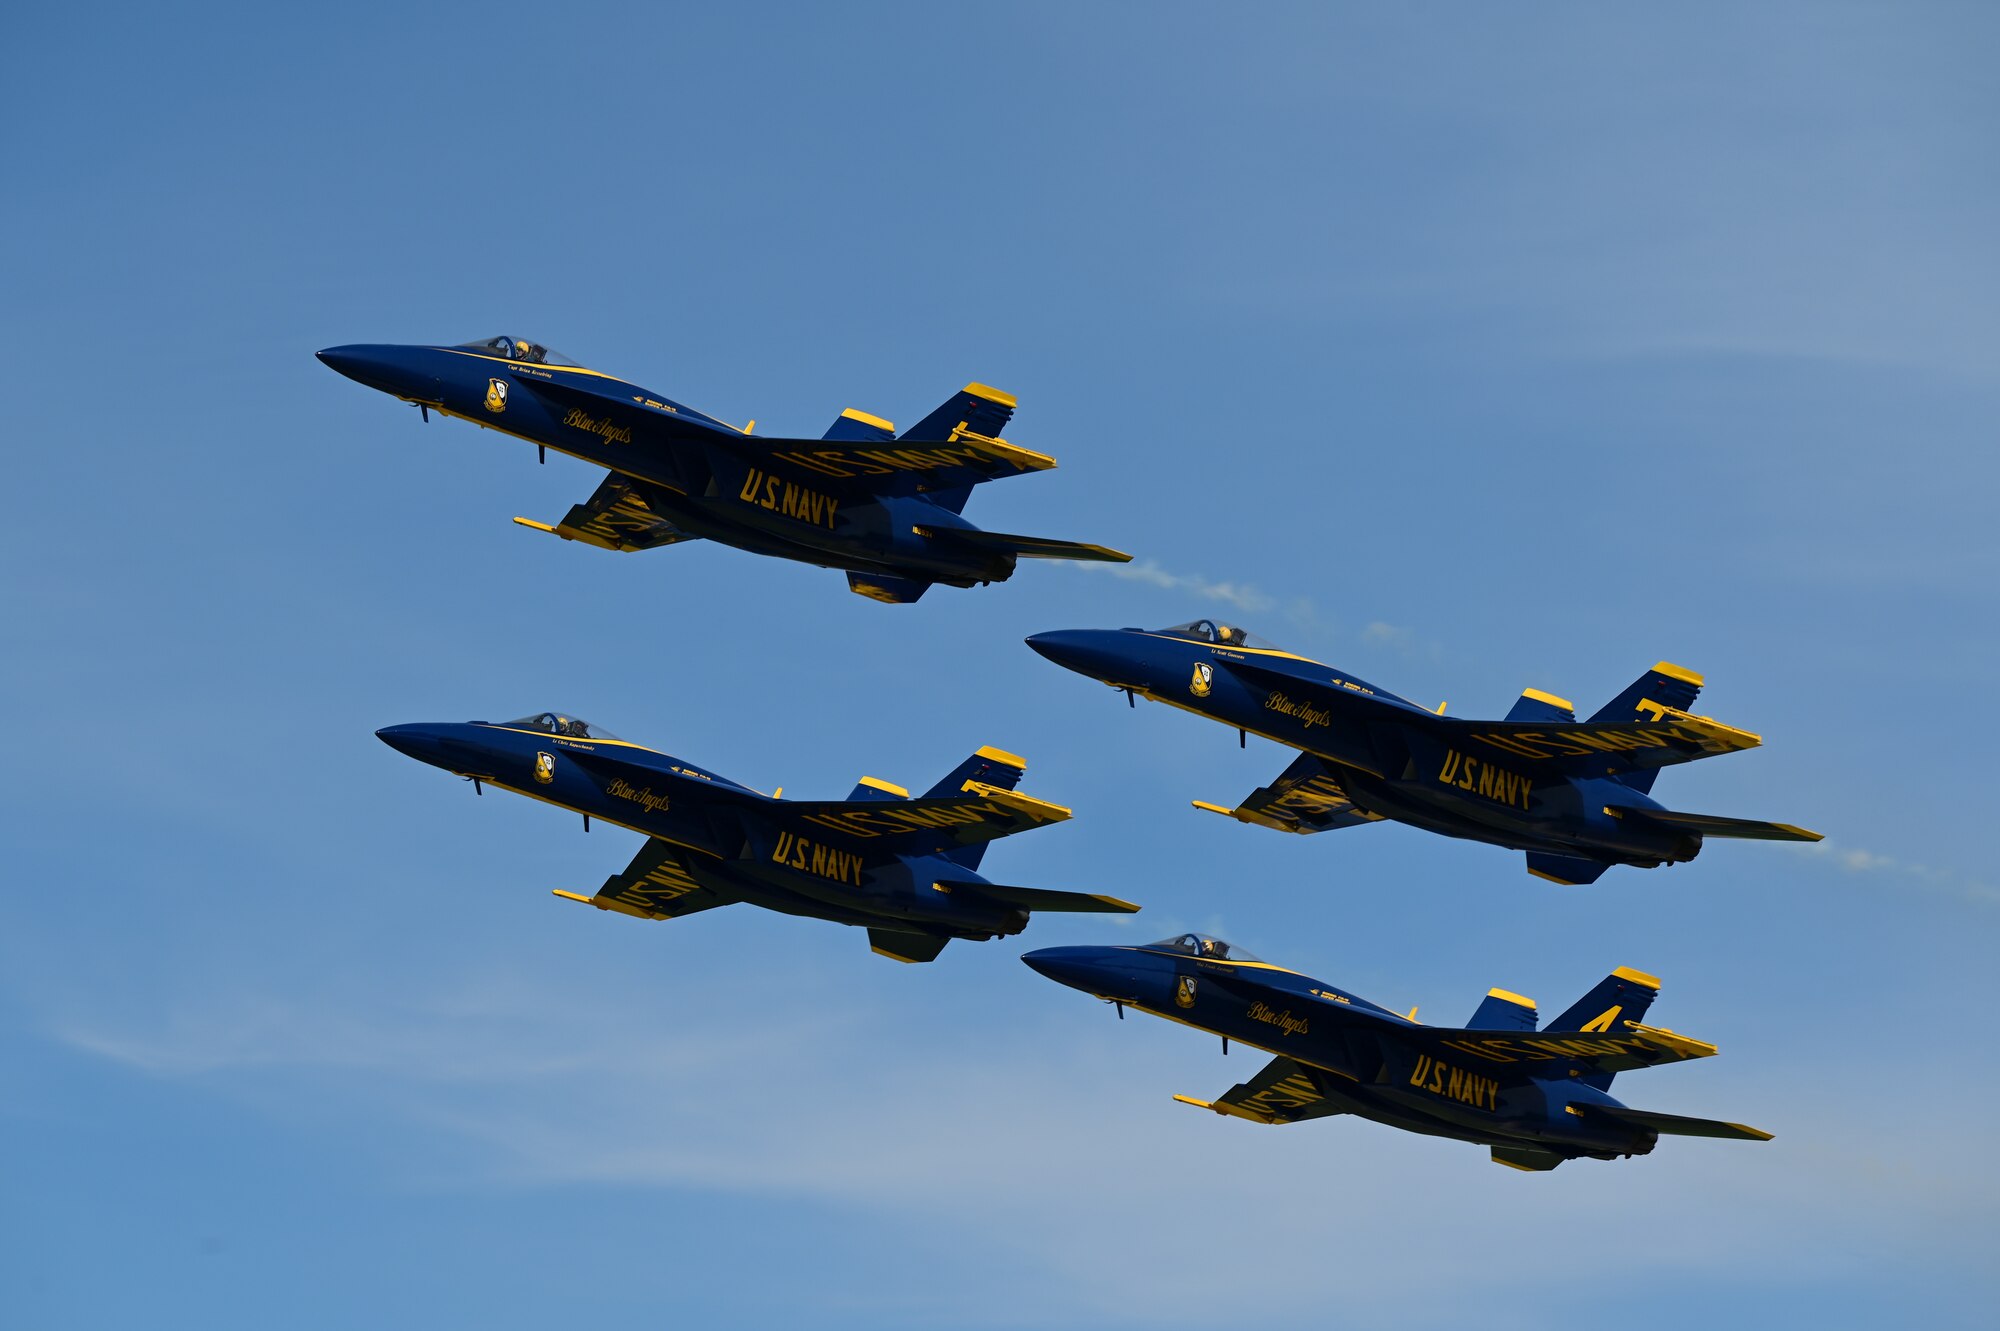 The U.S. Navy Flight Demonstration Squadron, the Blue Angels, perform during the 2022 Ellsworth Air and Space Show at Ellsworth Air Force Base, S.D., May 14, 2022. Their mission is to showcase the teamwork and professionalism of the United States Navy and Marine Corps. (U.S. Air Force photo by Staff Sgt. Hannah Malone)